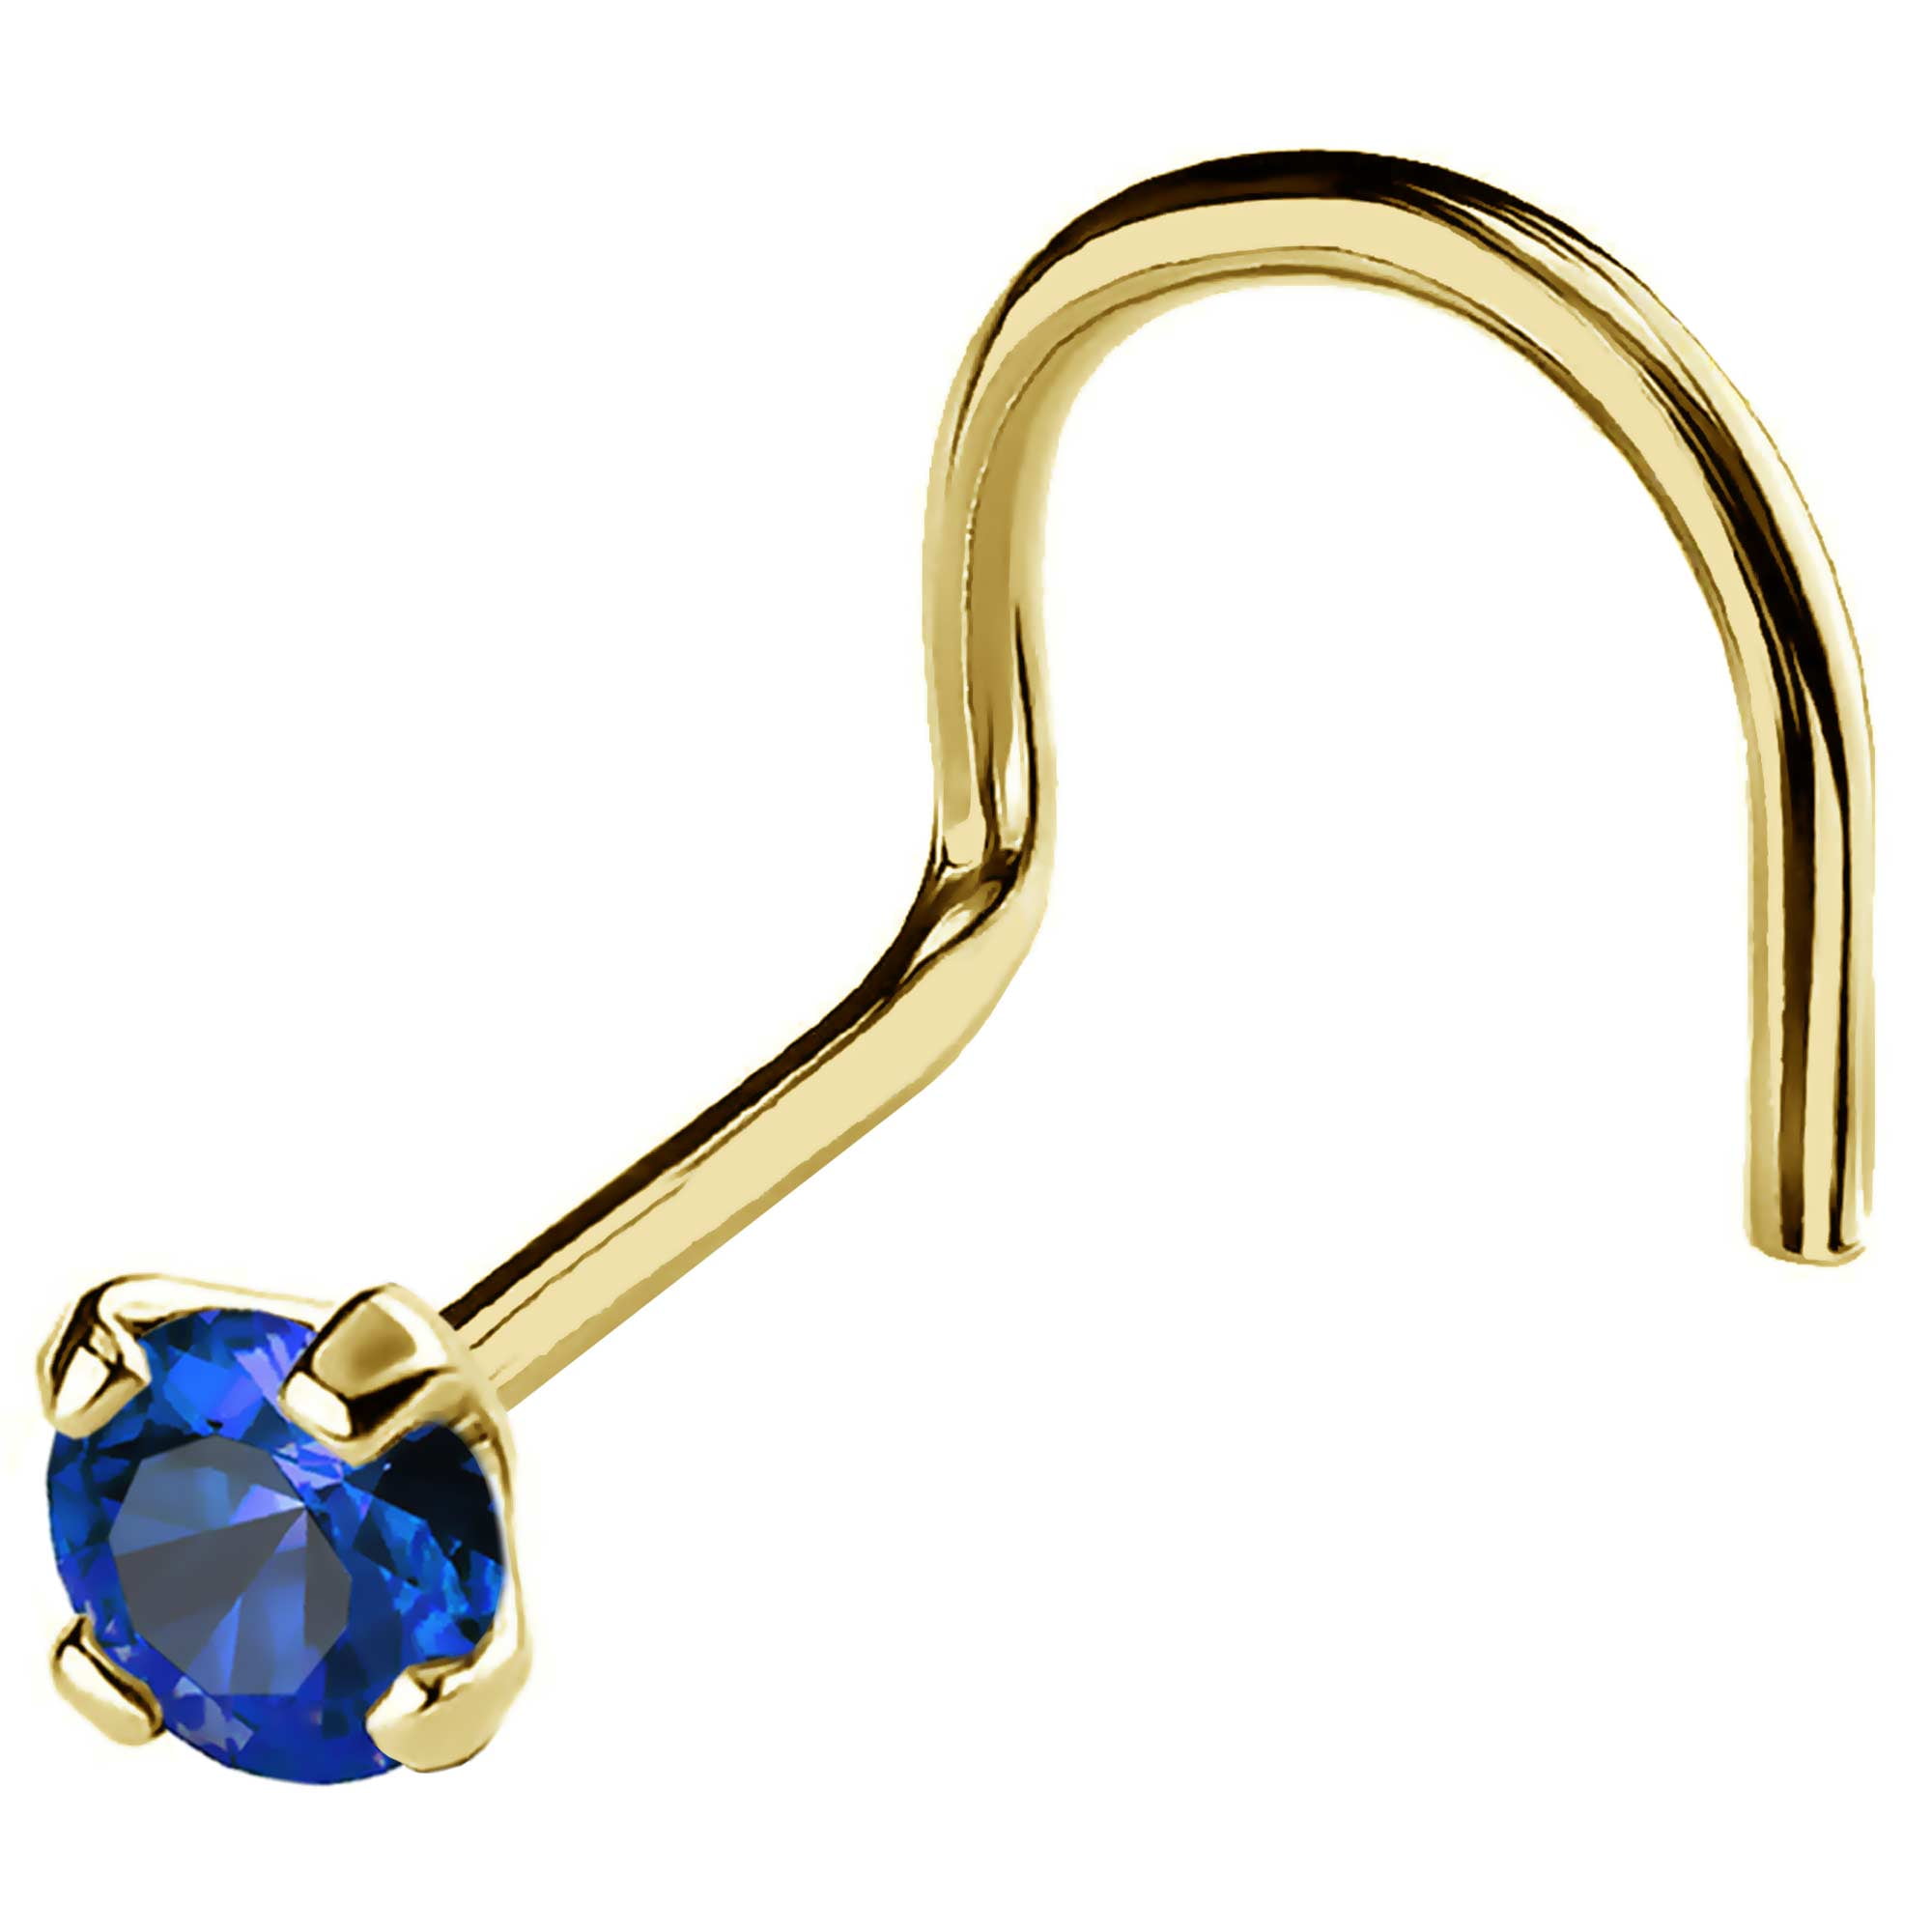 Buy Real Diamond and Blue Sapphire Flower Nose Ring Pins For Women 14k  Yellow Gold Ring Jewels Jewelry (Yellow Gold) at Amazon.in